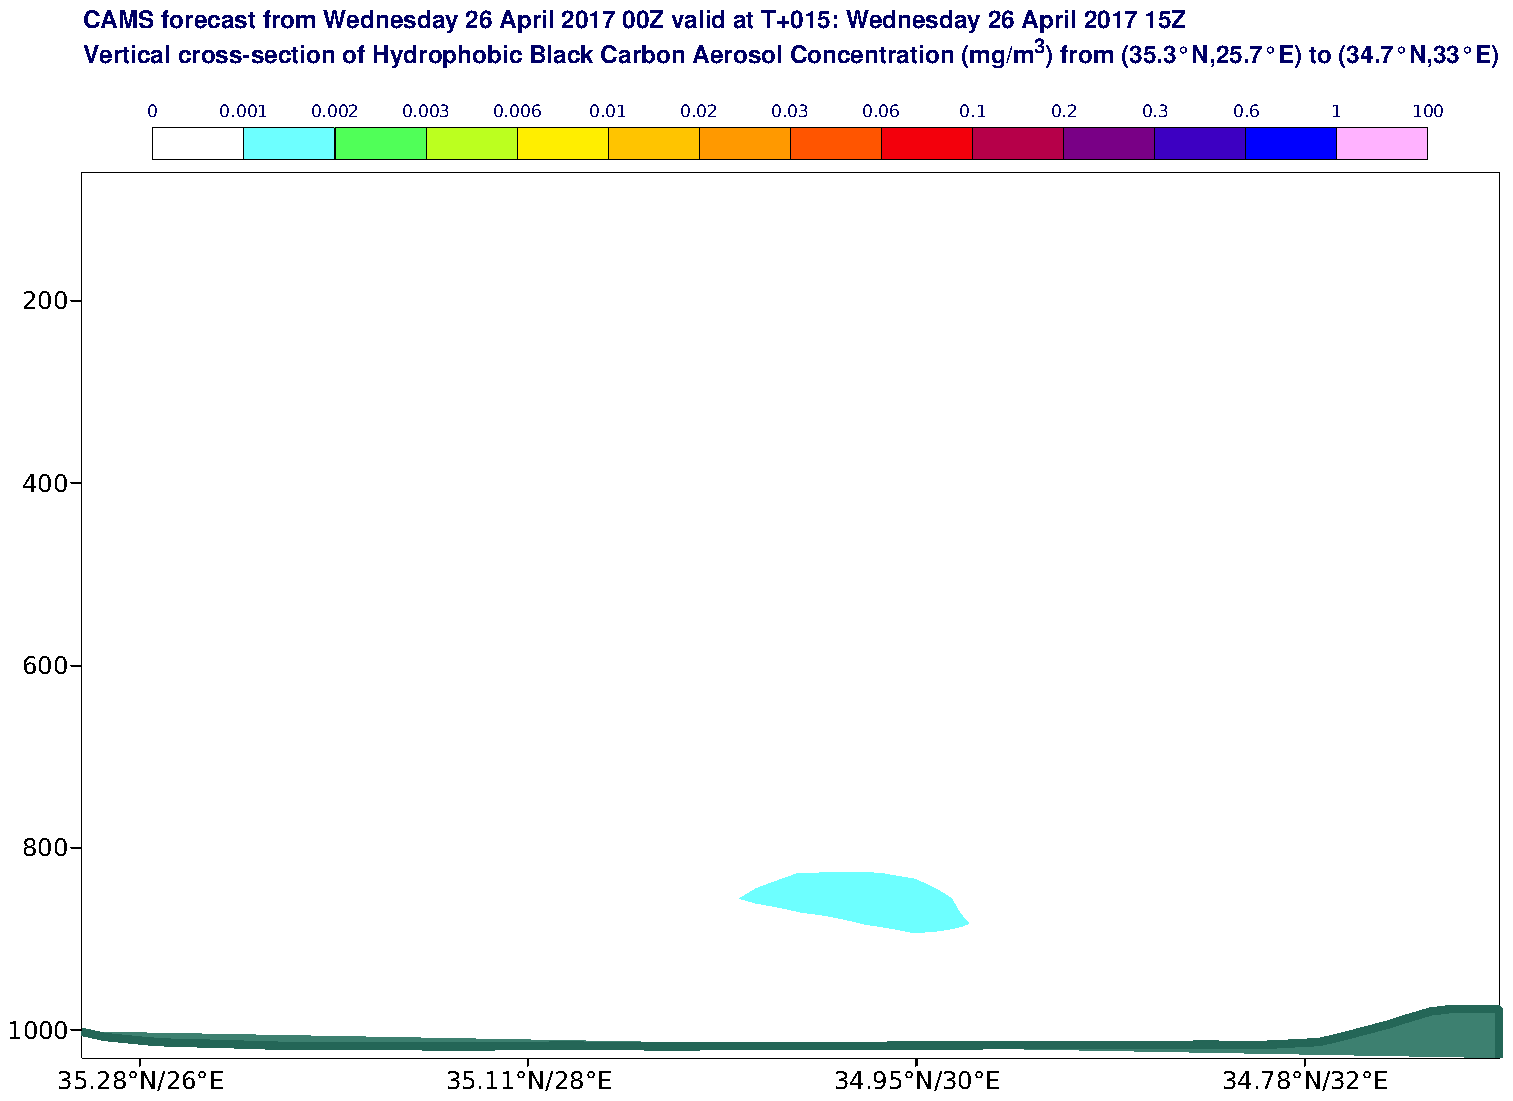 Vertical cross-section of Hydrophobic Black Carbon Aerosol Concentration (mg/m3) valid at T15 - 2017-04-26 15:00